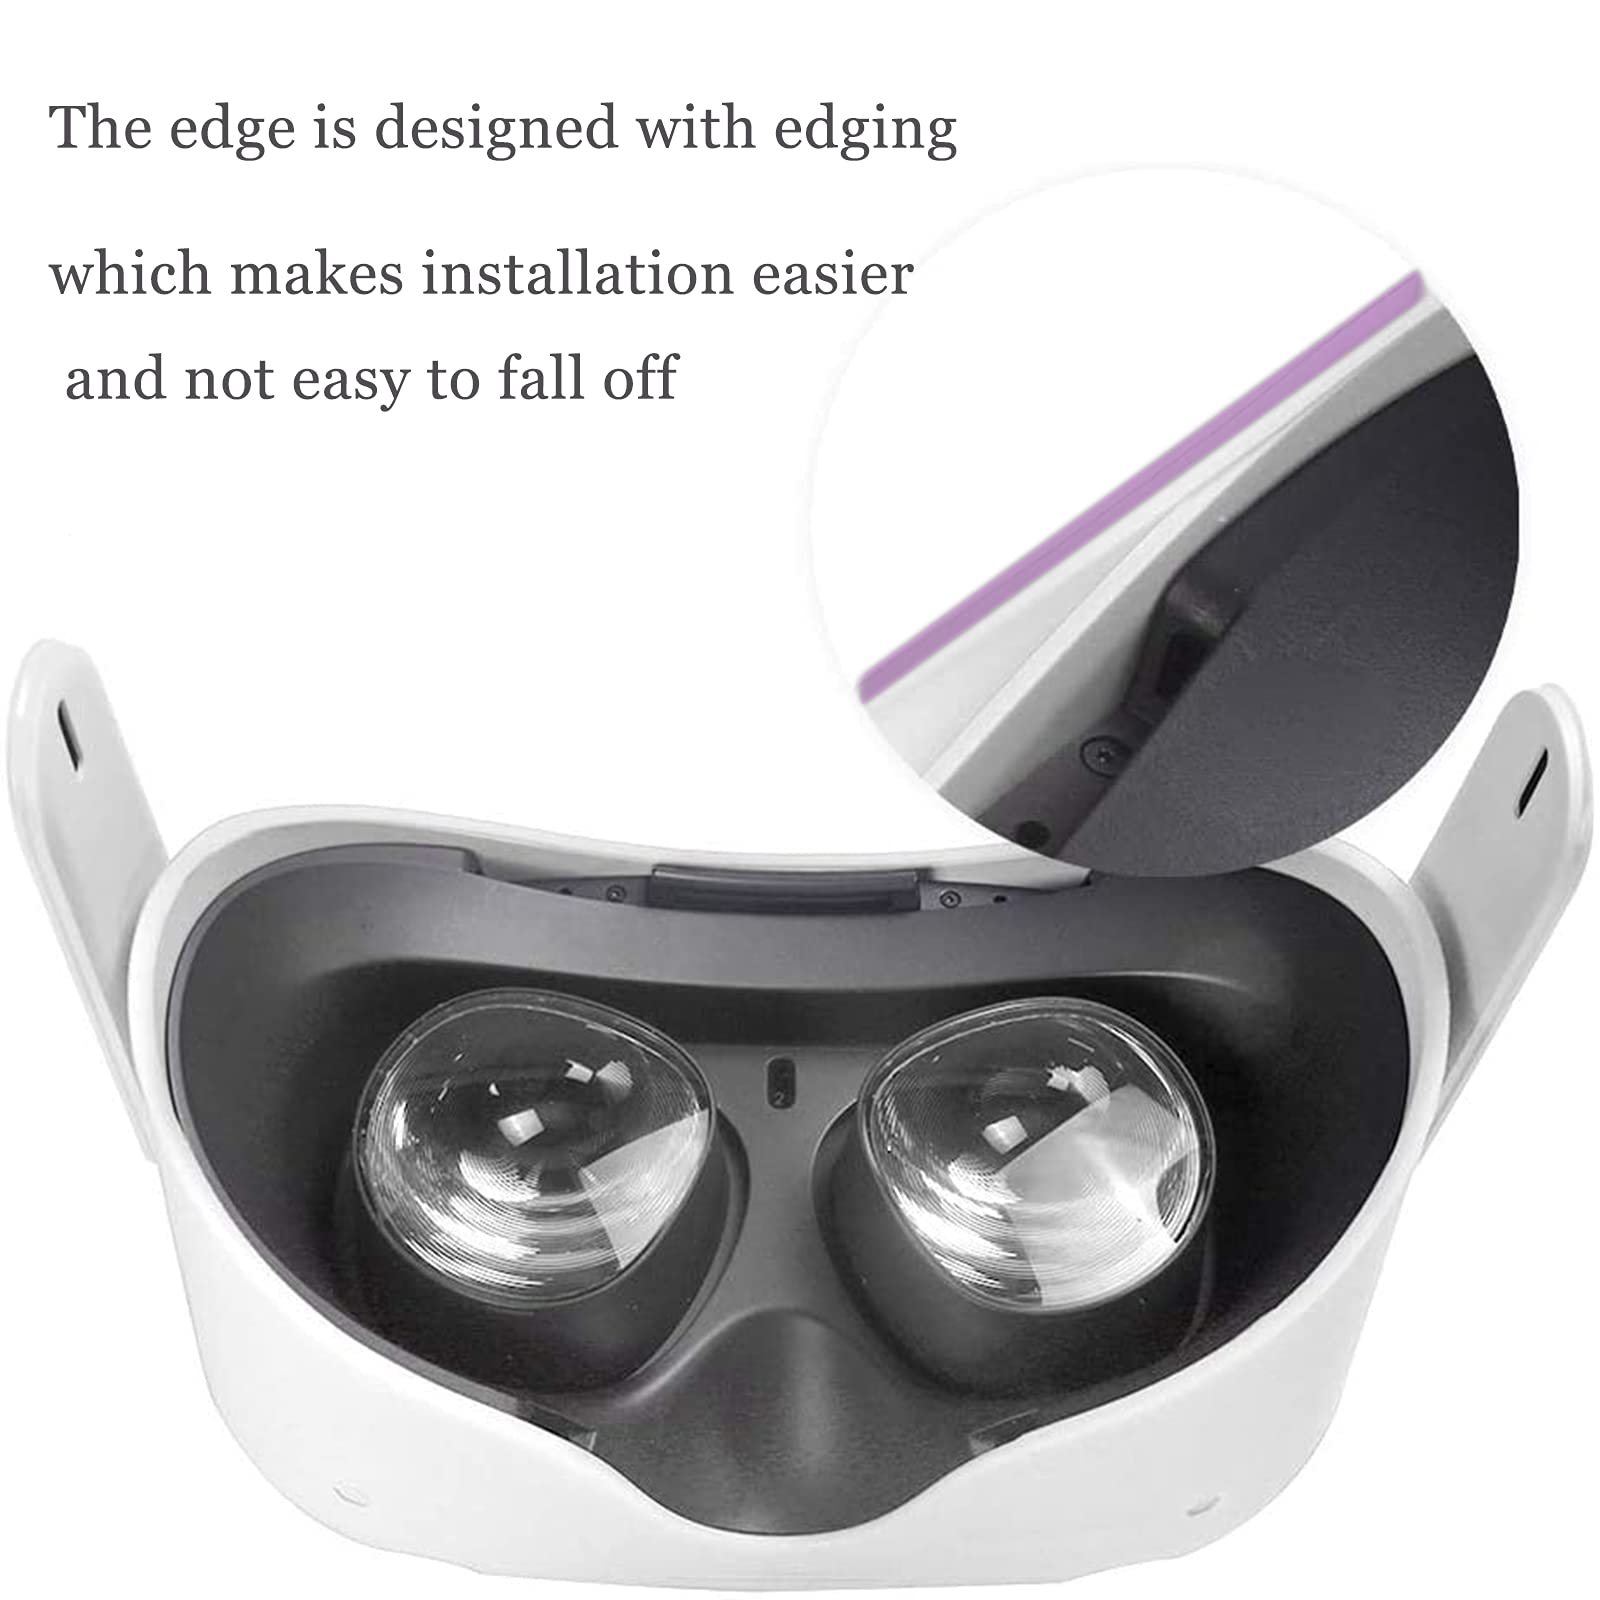 Silicone Protective Shell Cover for Meta/Oculus Quest 2 | Anti Scratch Anti Dust Anti Shock(White & Black)